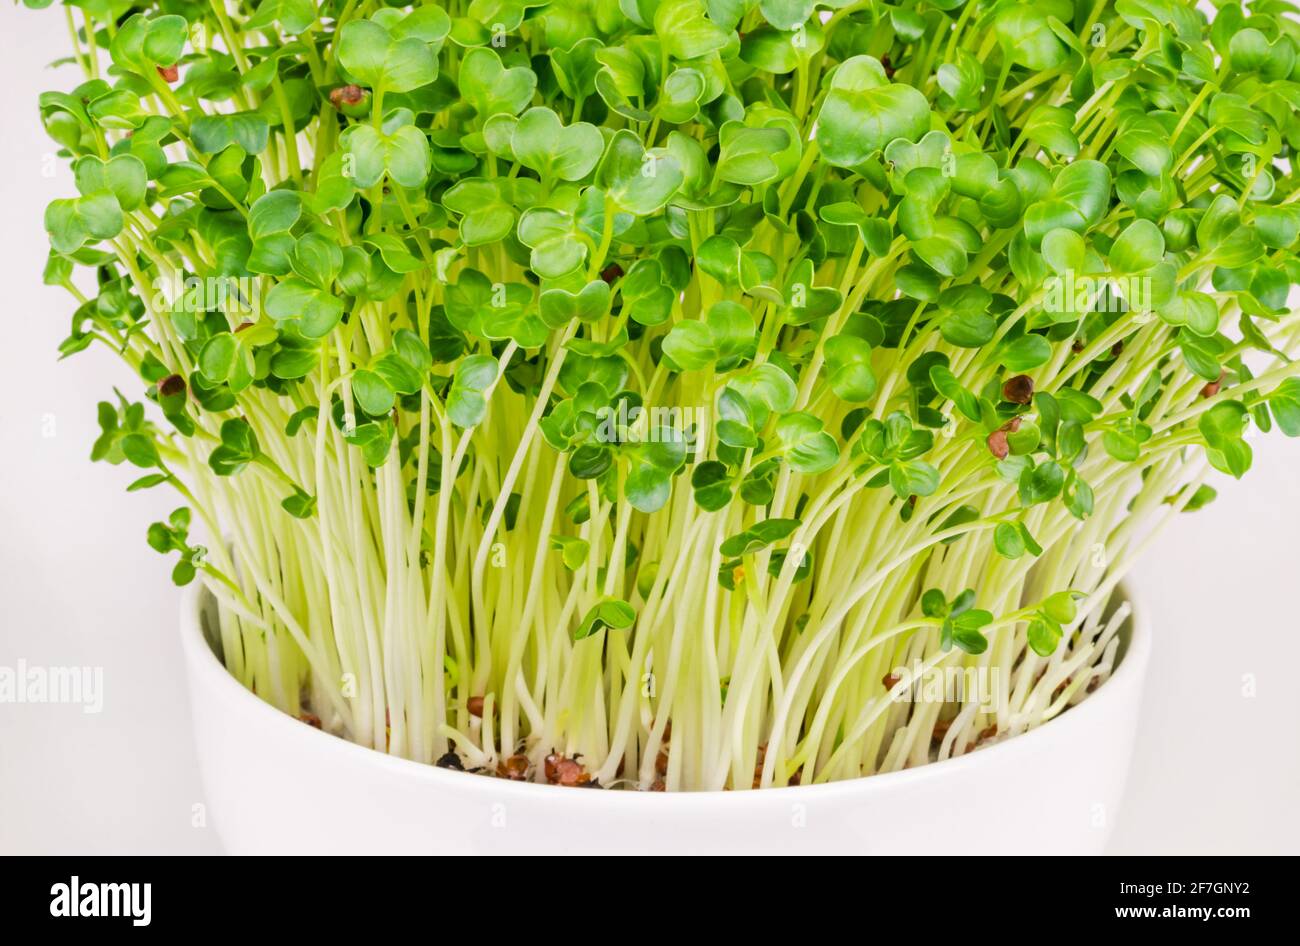 Daikon radish, microgreens in a white bowl. Fresh and ready to eat, sprouted Japanese radish. Green shoots, seedlings, young plants and leaves. Stock Photo